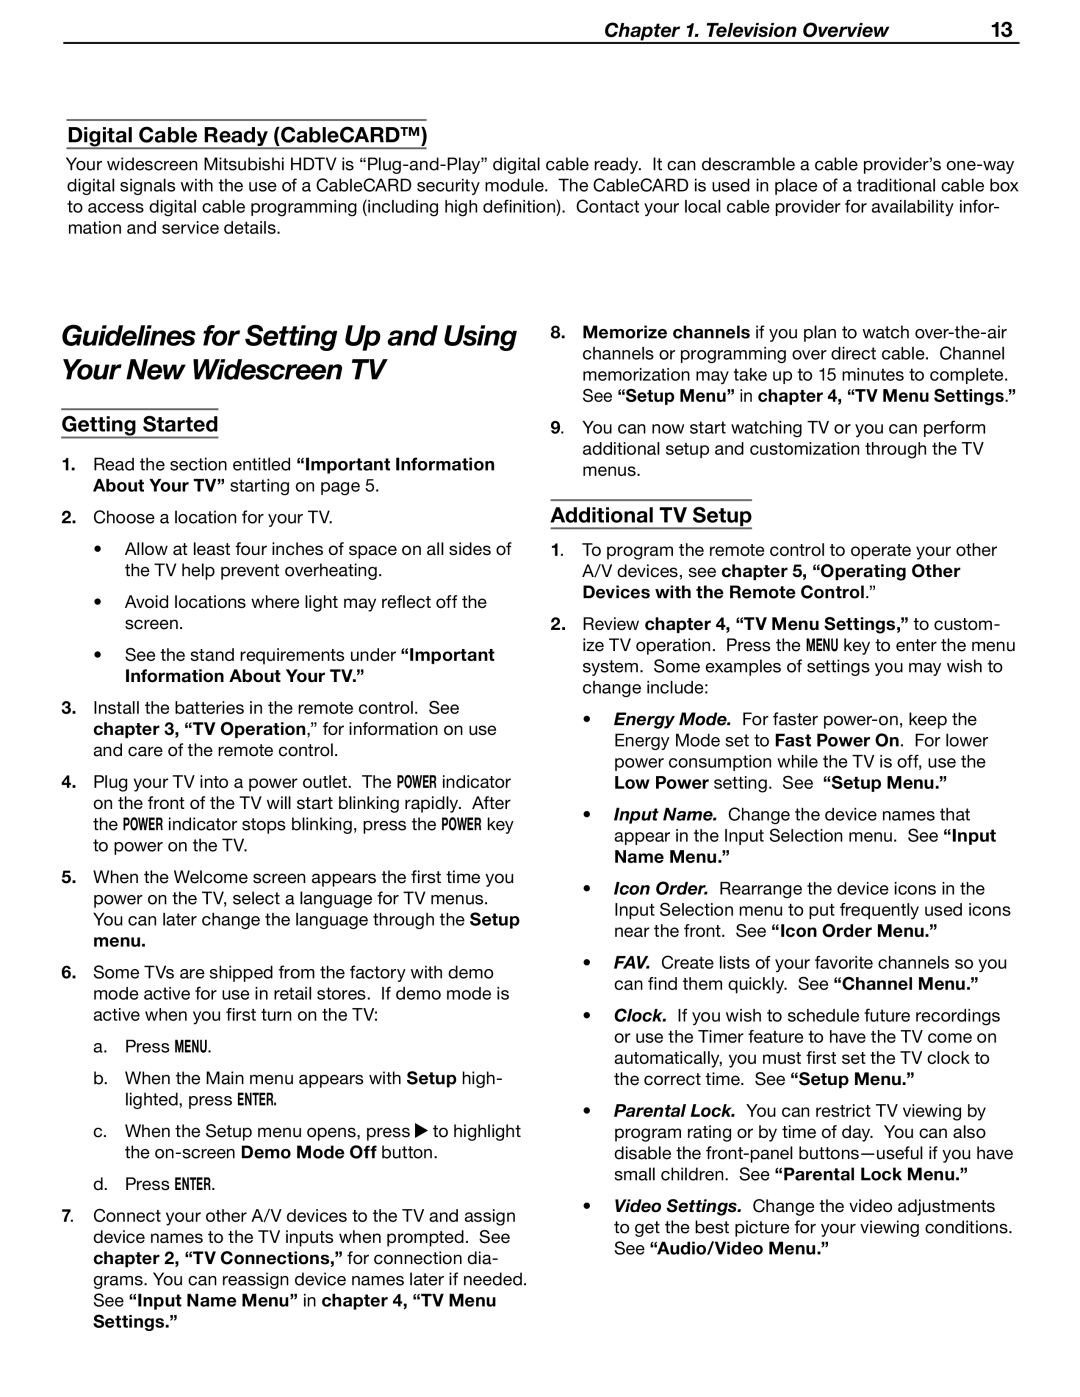 Mitsubishi Electronics LT-37131 Guidelines for Setting Up and Using Your New Widescreen TV, Digital Cable Ready CableCARD 